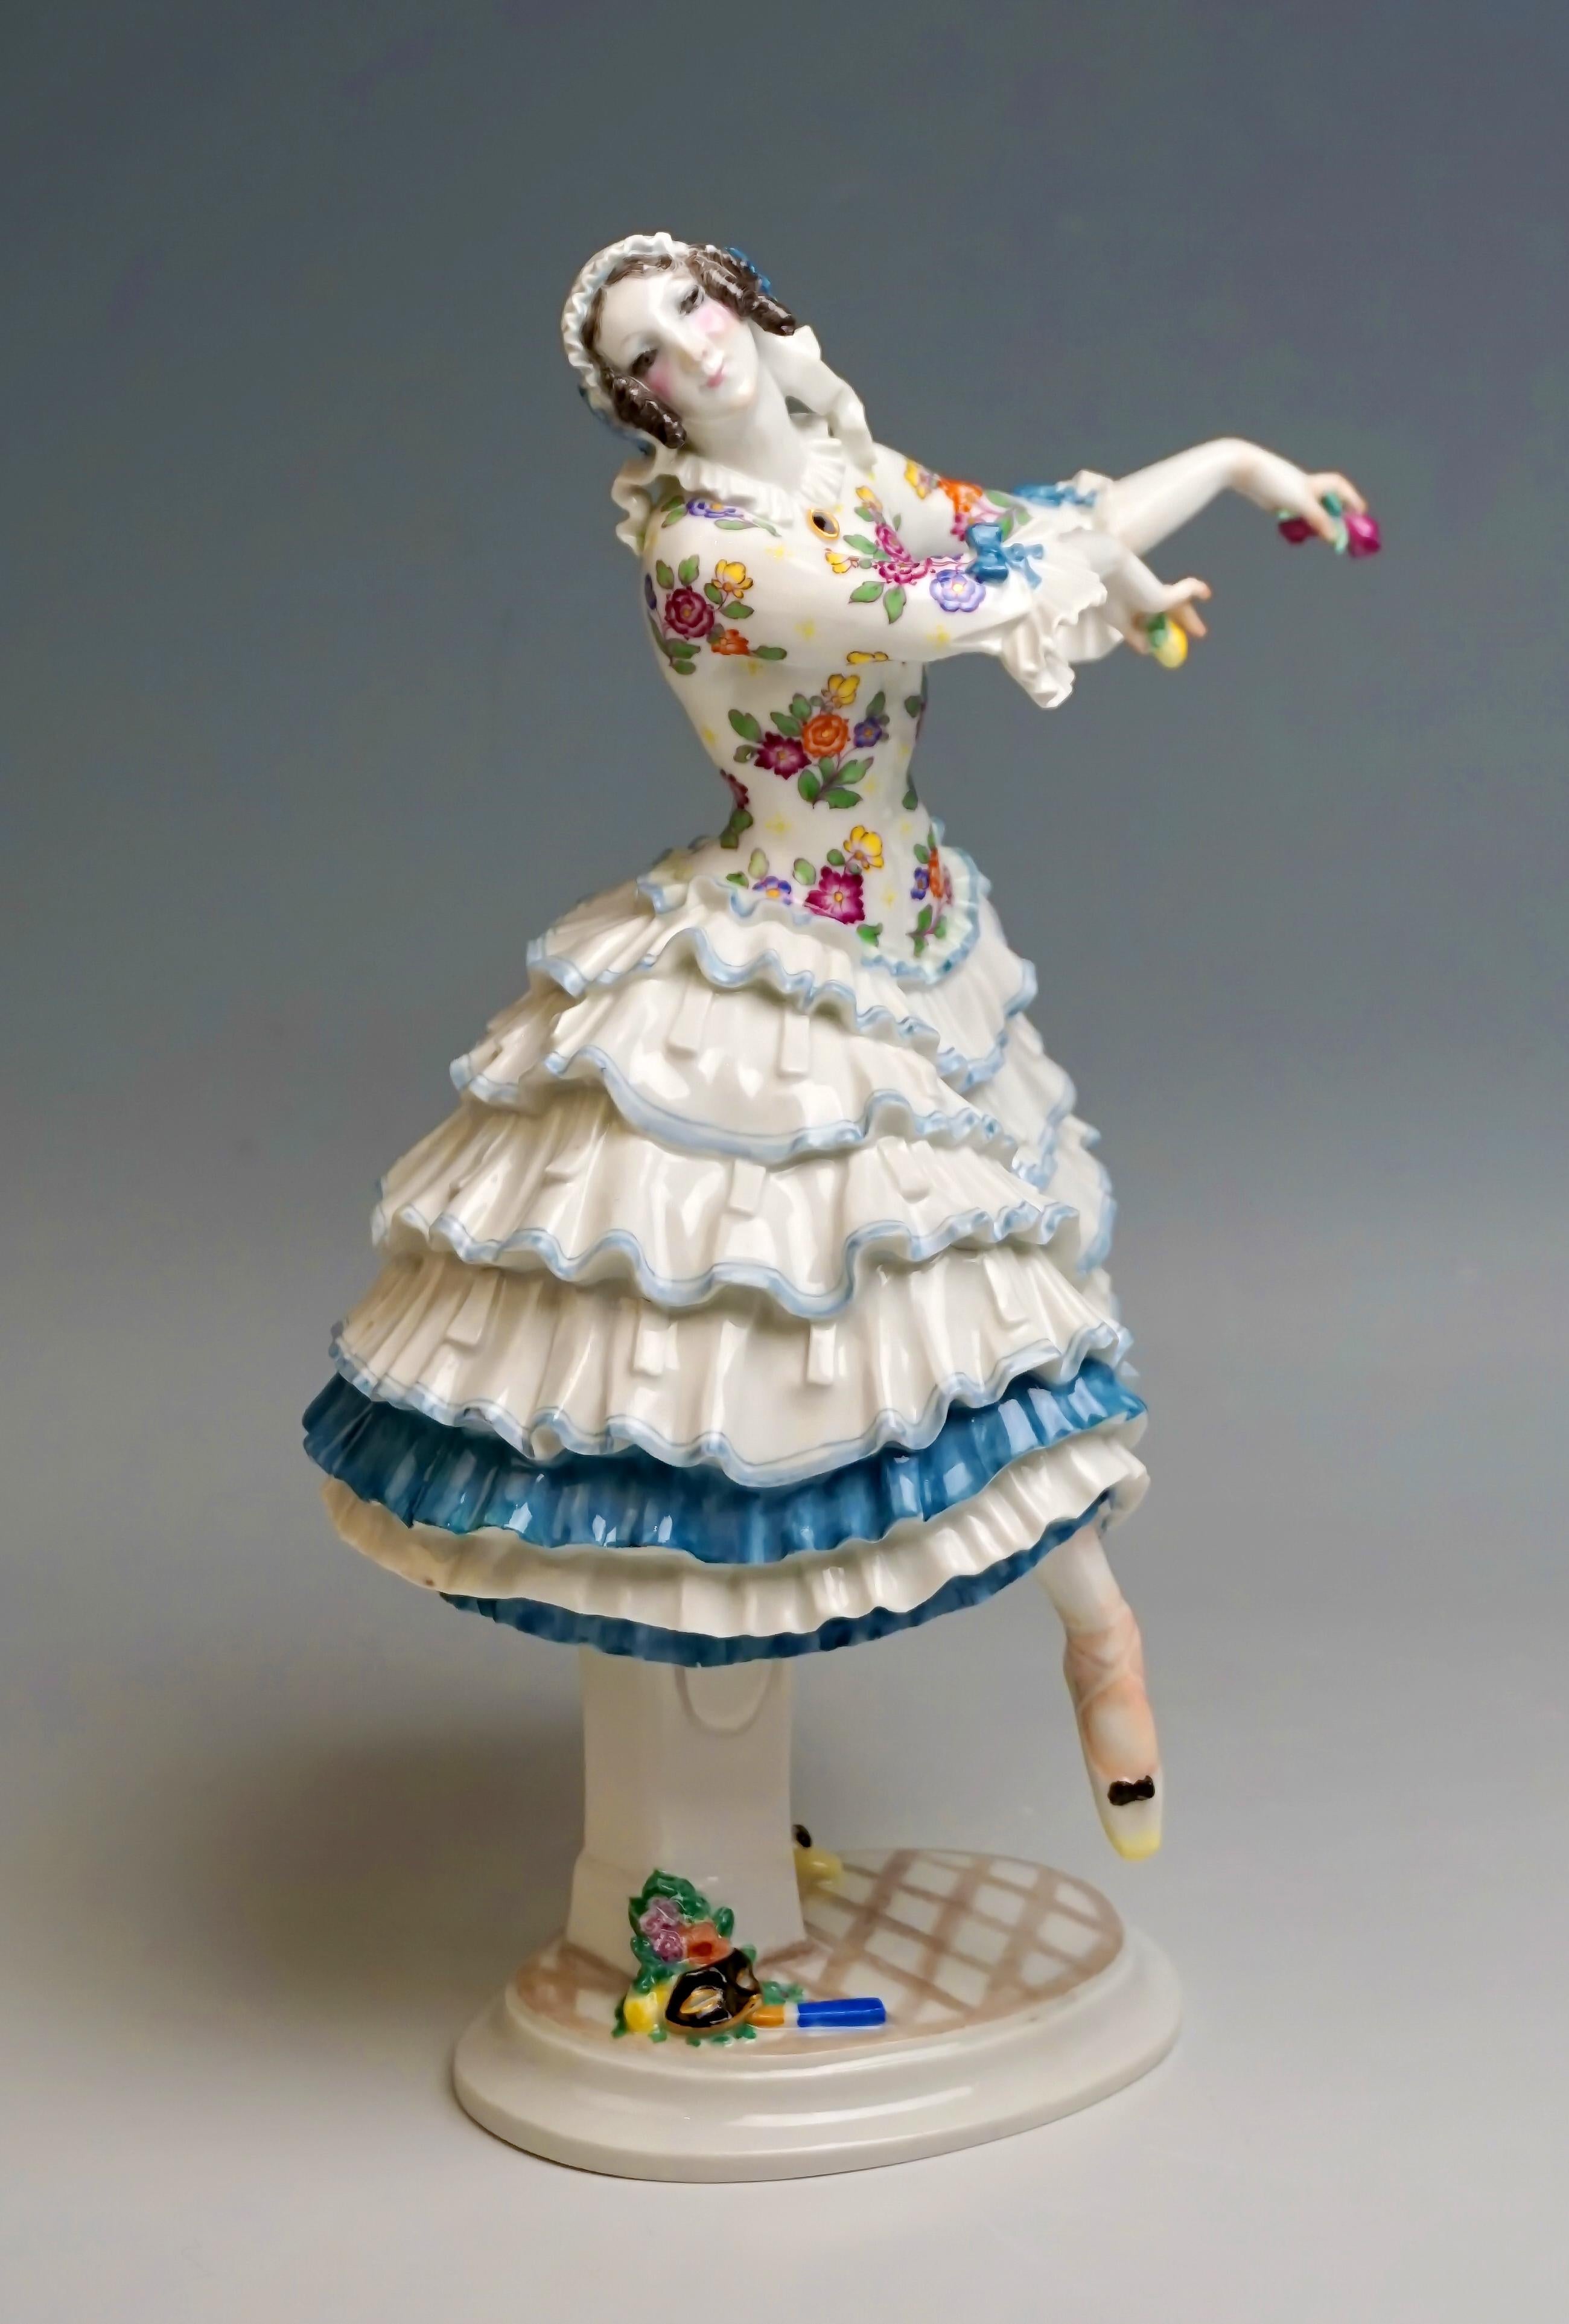 Porcelain Figurine 'Chiarina' from the Russian Ballet 'Carnival', circa 1920

Manufactory: Meissen Germany
Dating of manufacture: 1913-1923
Material: China Porcelain, glossy finish
Technique: handmade porcelain, finest painting

Designer: